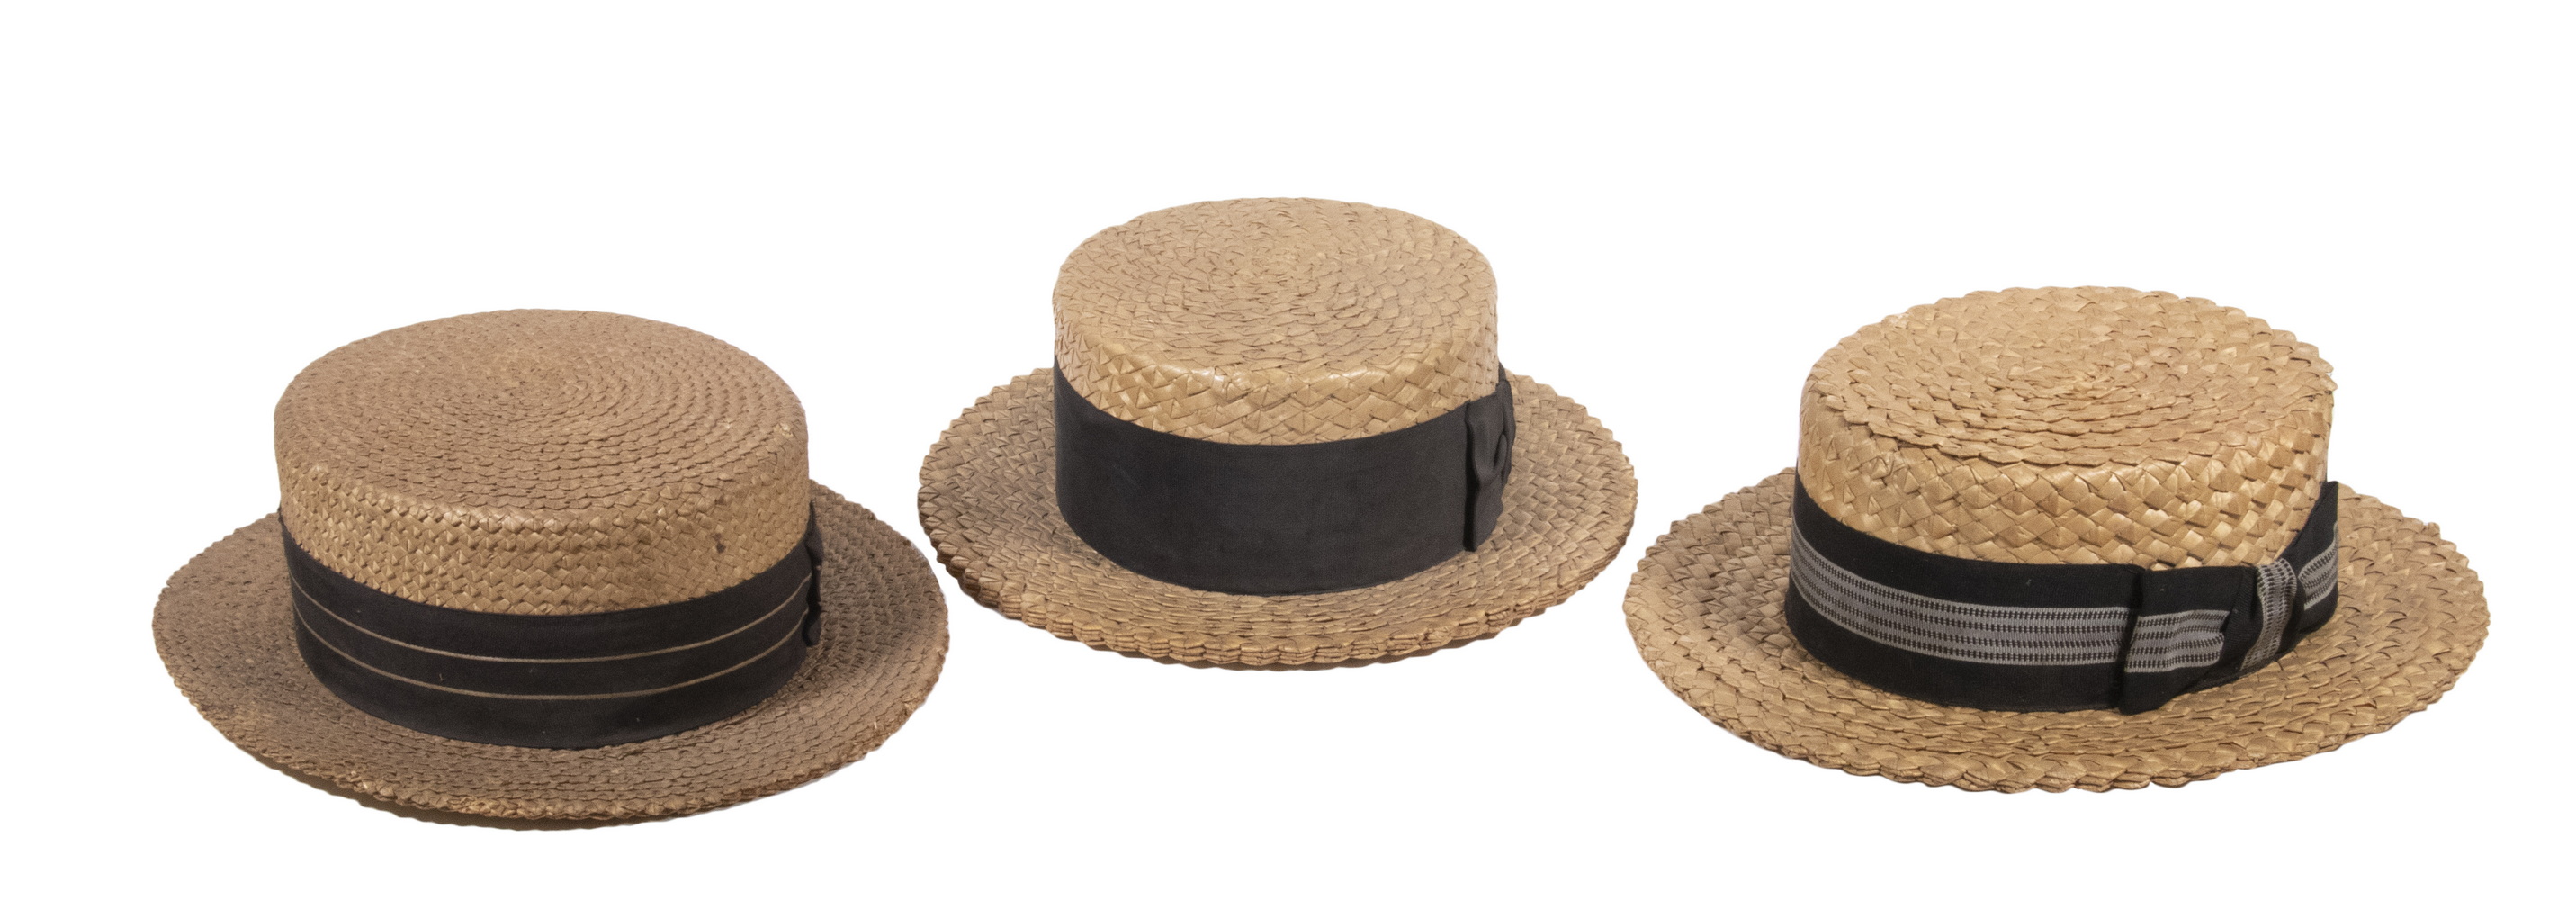 STRAW BOATER HATS Lot of (3) Vintage